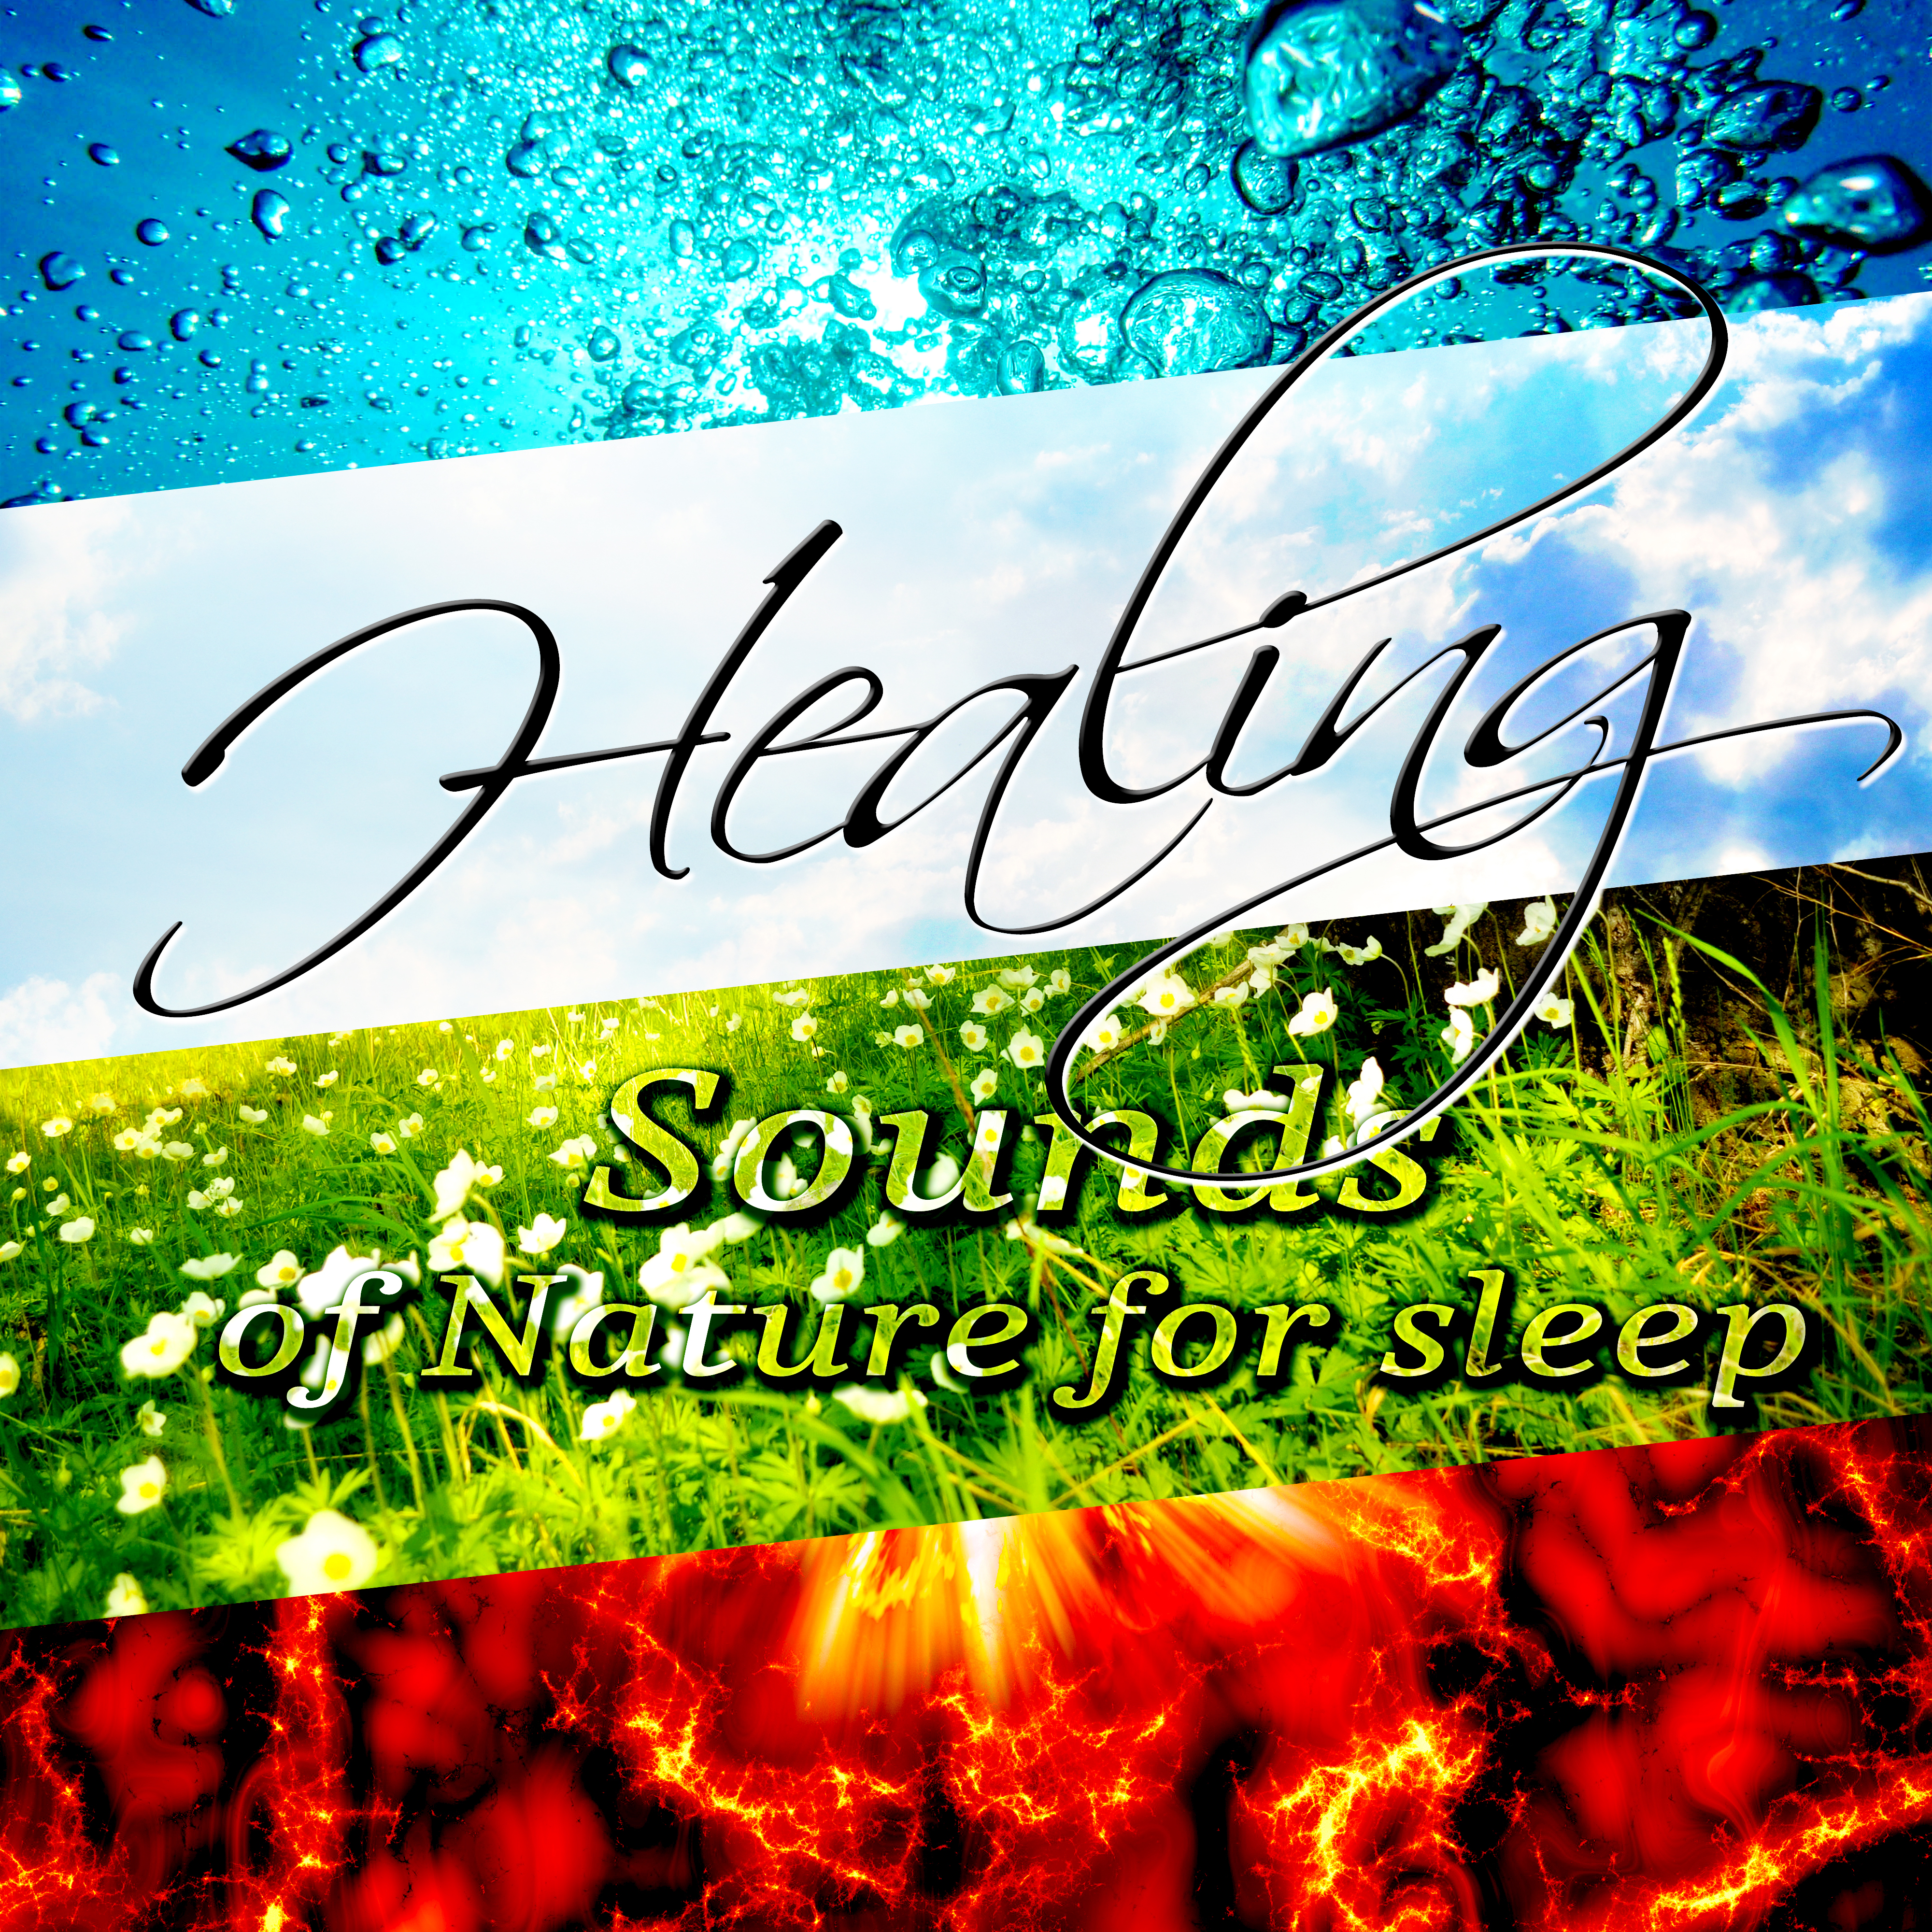 Healing Sounds of Nature for Sleep – Ocean Waves, Birds Singing, Flute Music, Shakuhachi, Relaxing Piano and Other Natural Sounds